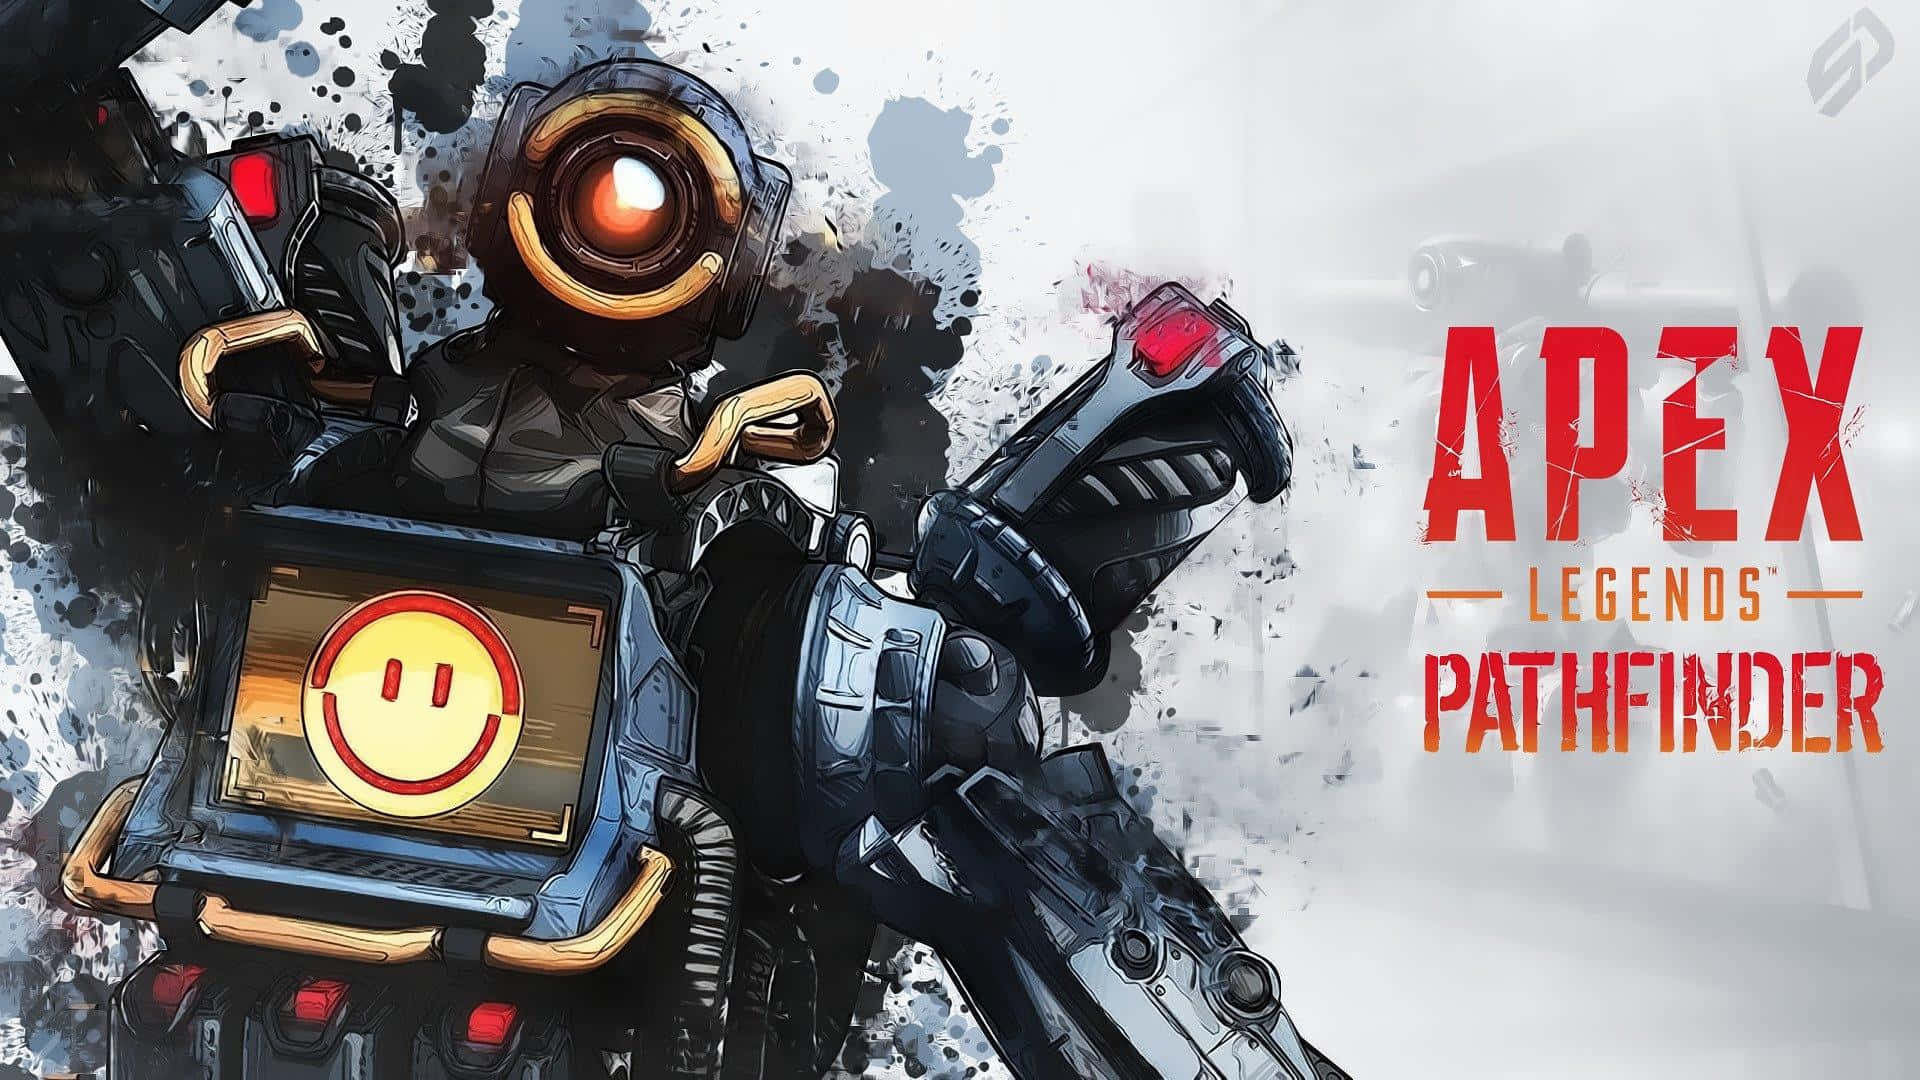 30 Pathfinder Apex Legends HD Wallpapers and Backgrounds